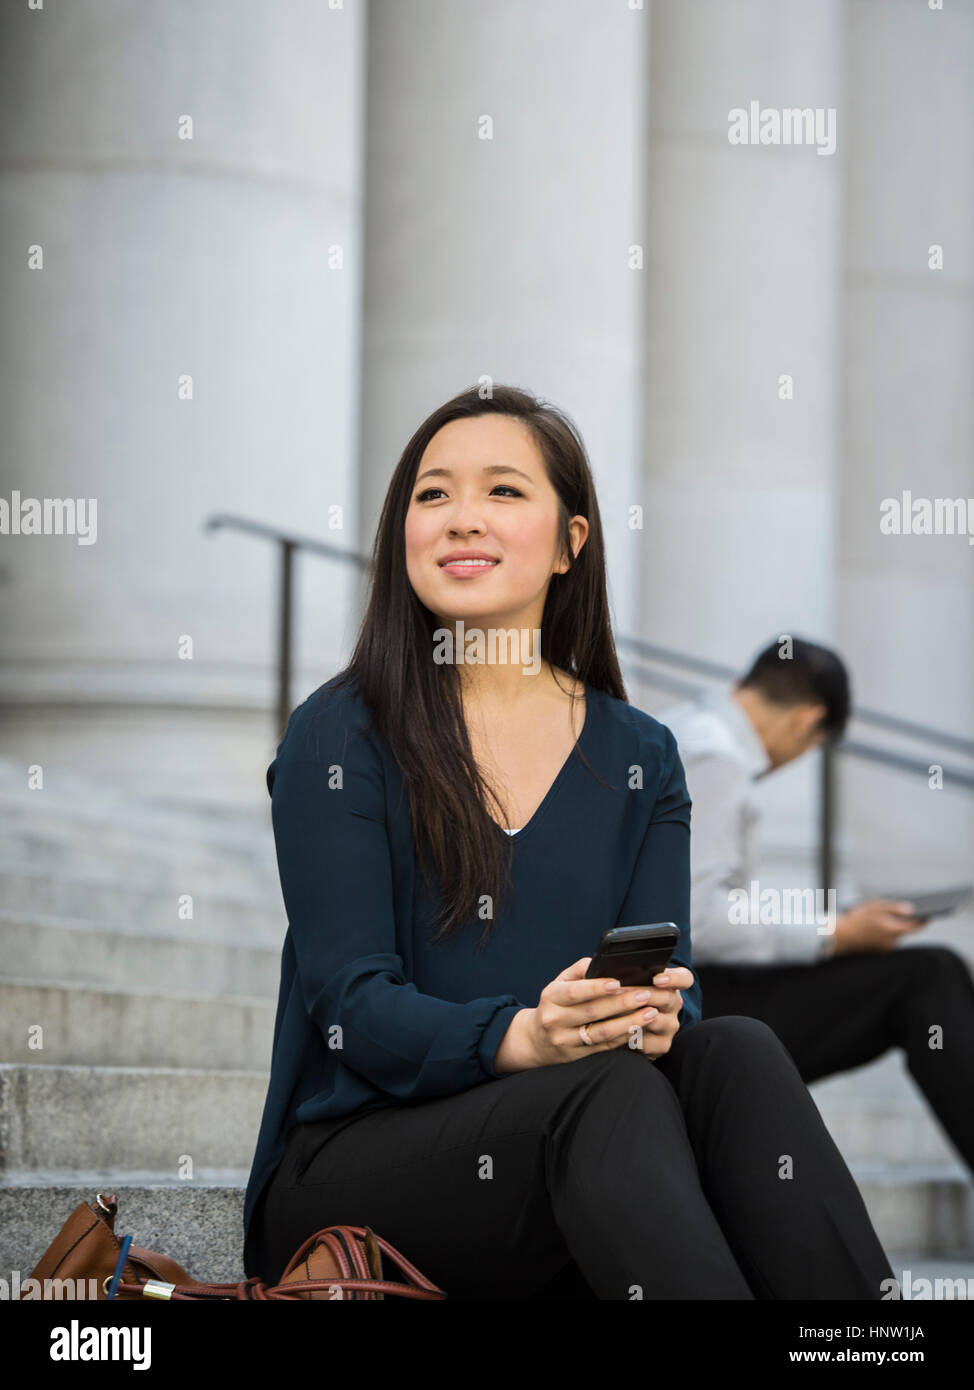 Chinese businesswoman sitting on staircase holding cell phone Banque D'Images